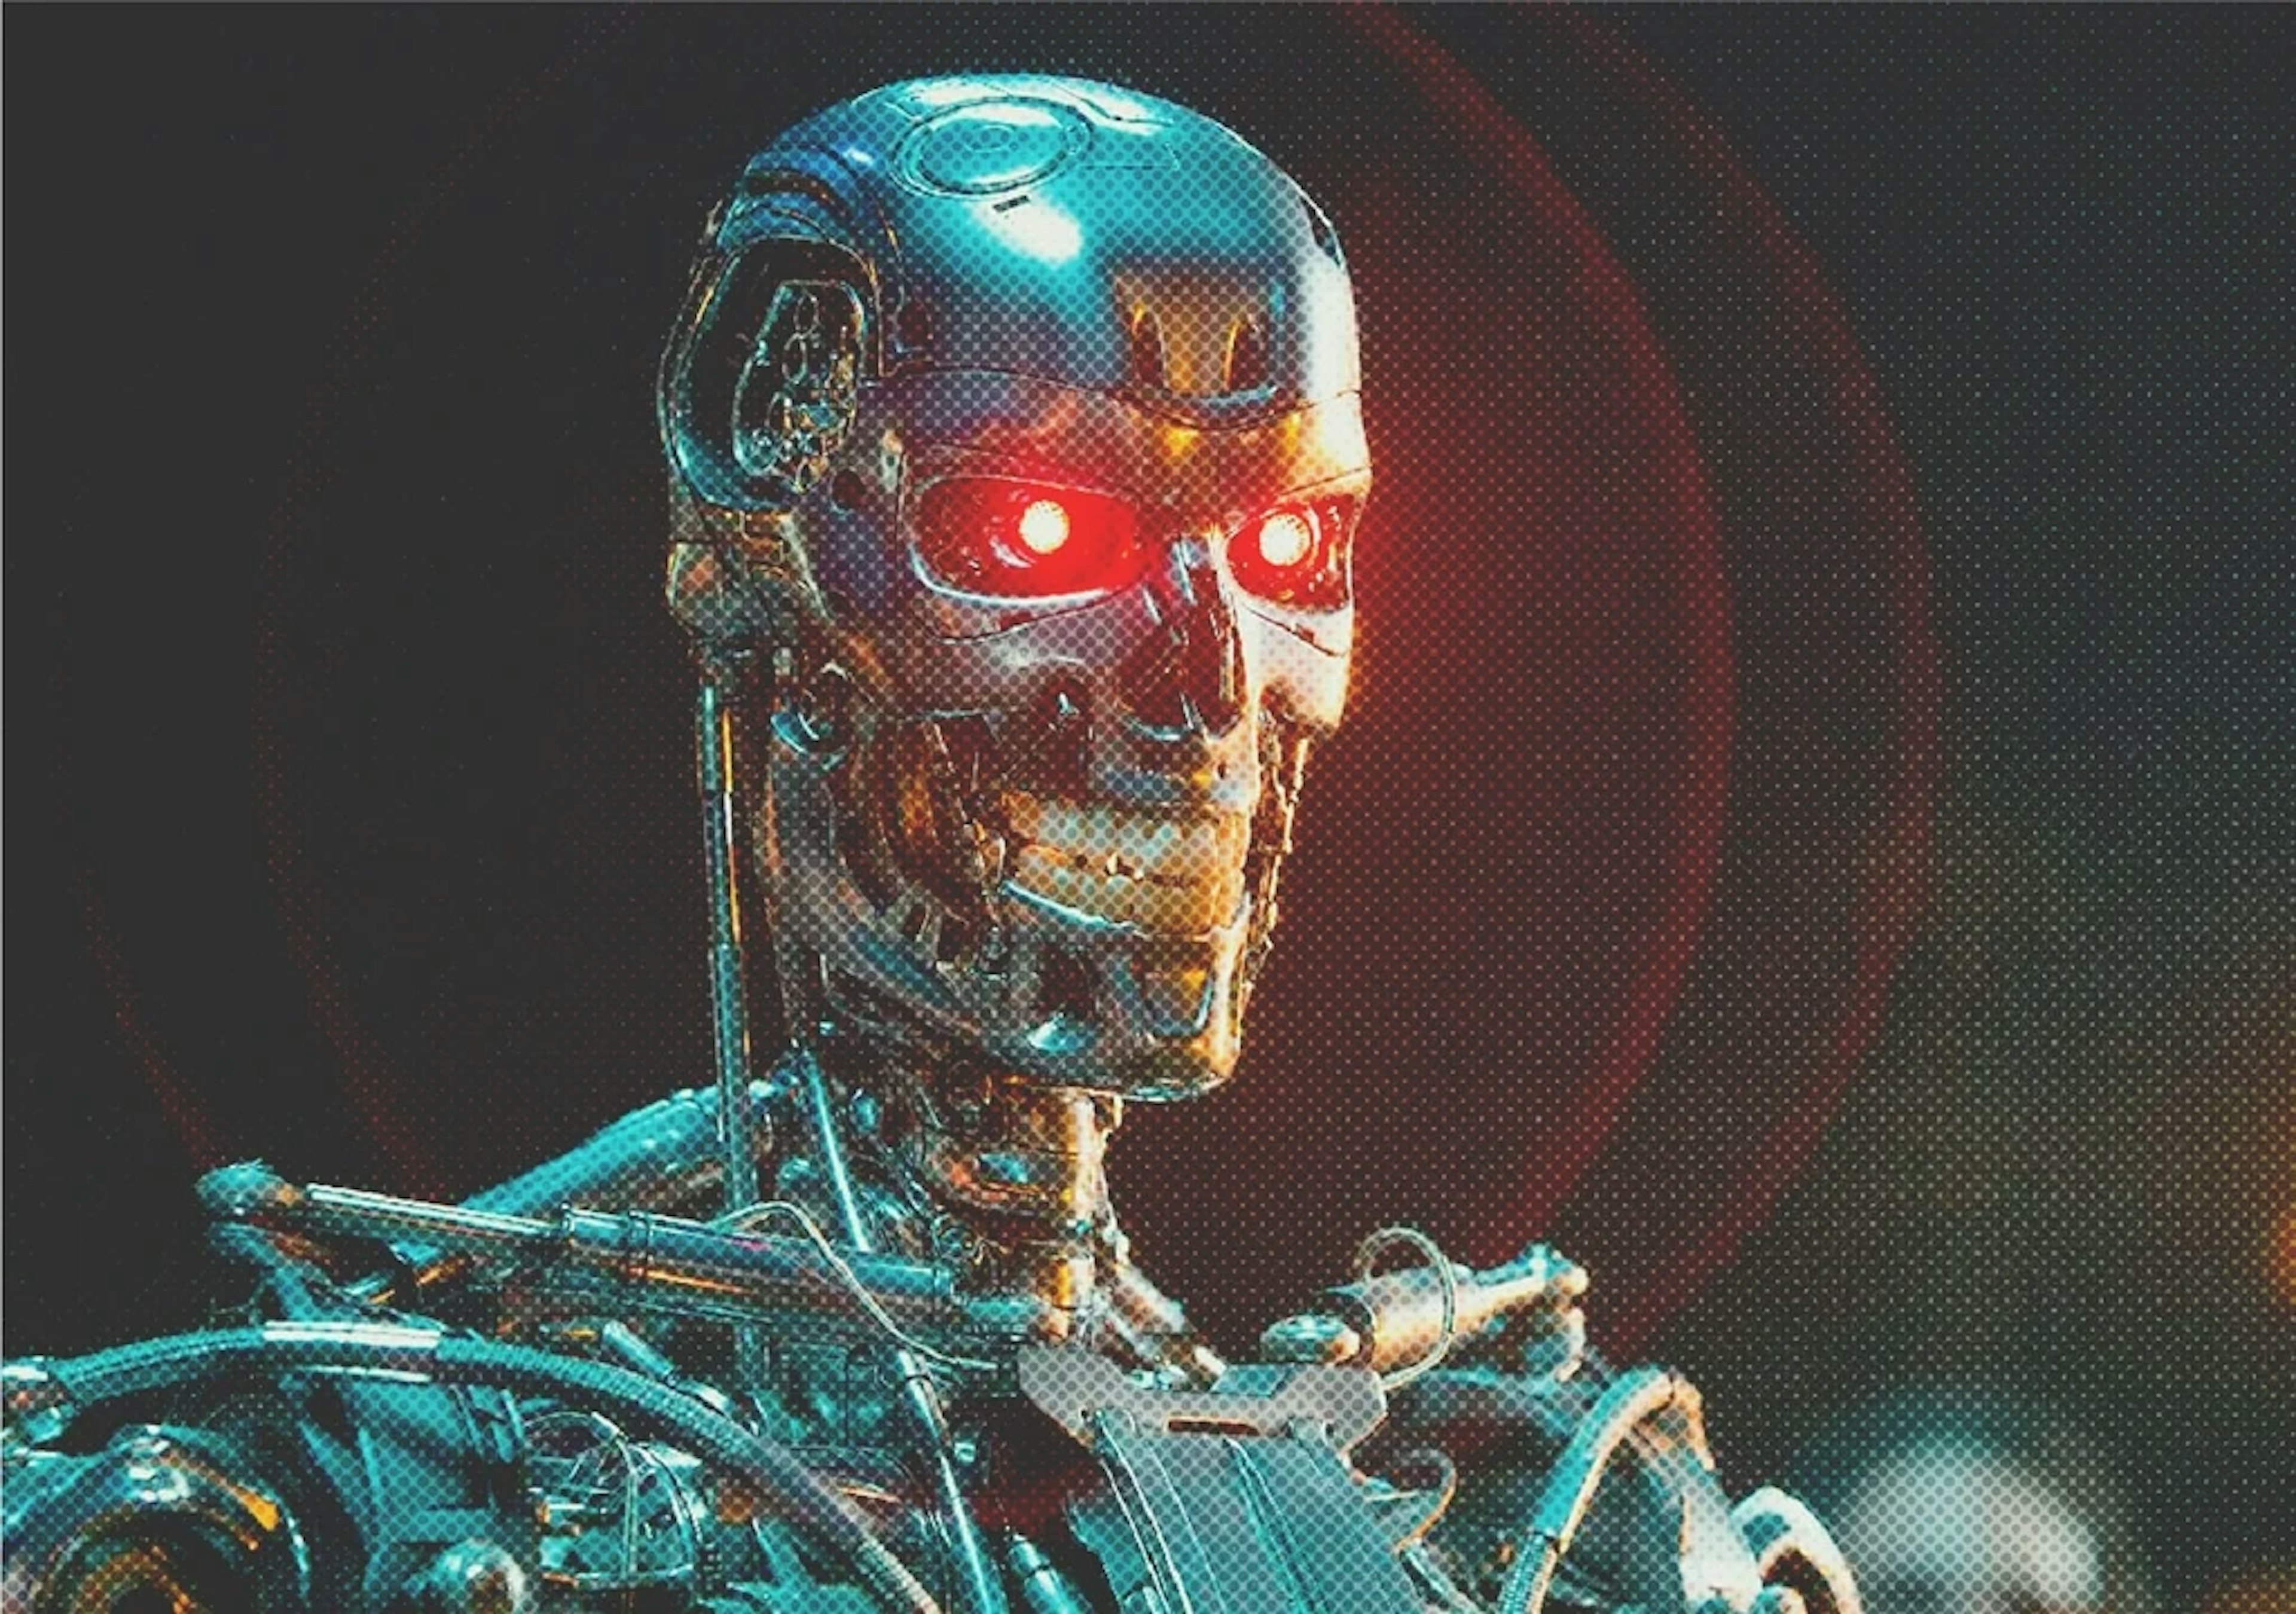 The Future Of Ai: Do We Need Sarah Connor To Handle This?